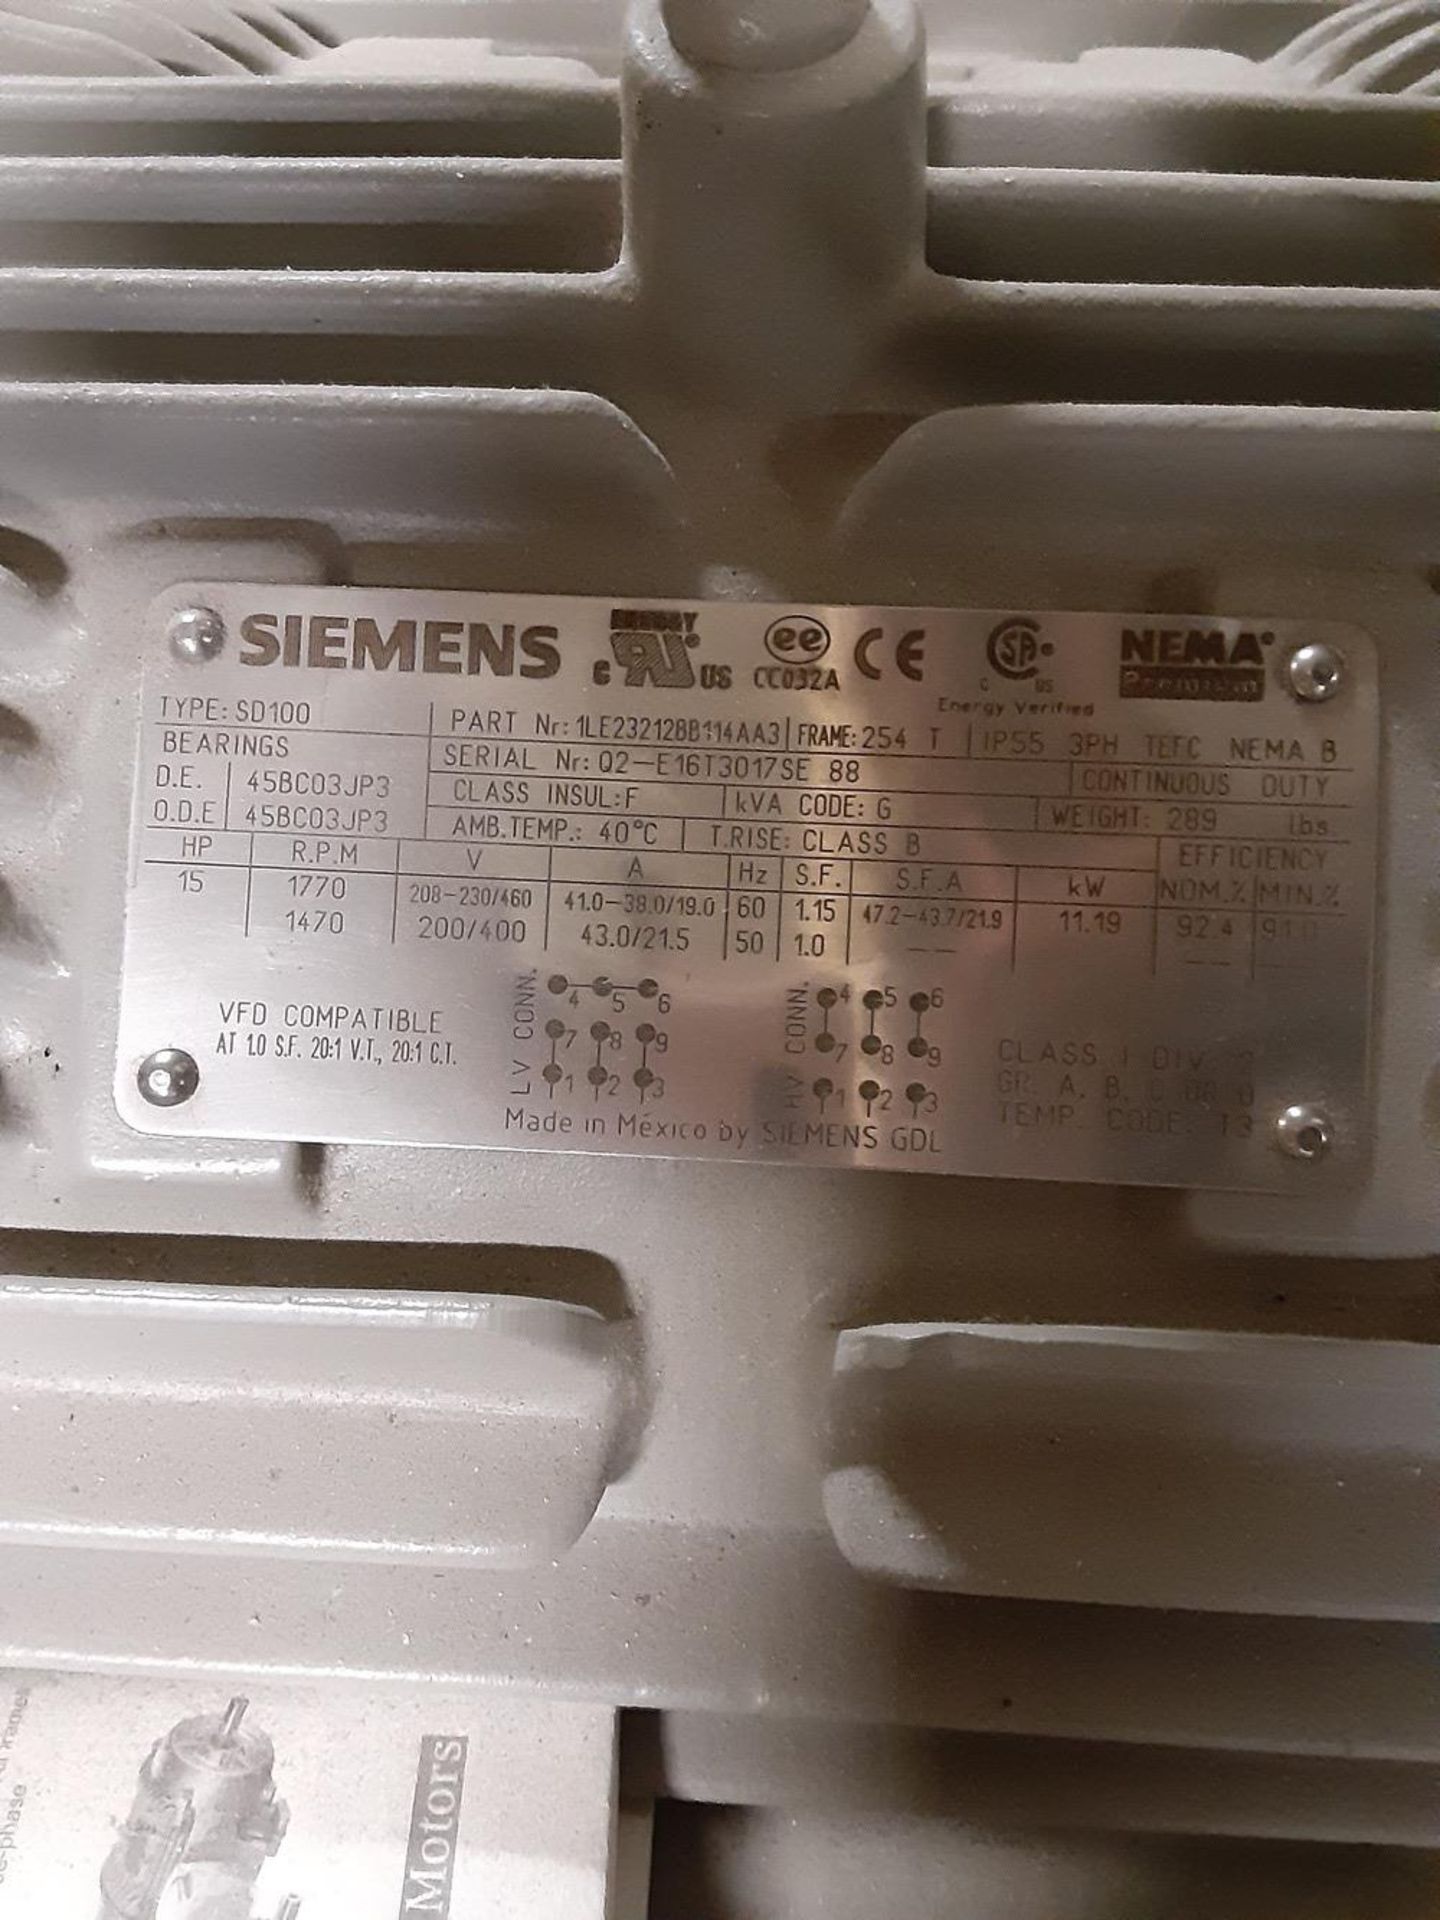 Siemen Electric Motor, 15 HP - Subject to Bulk Bid Lot 845B -The Greater of th | Rig Fee: No Charge - Image 2 of 2